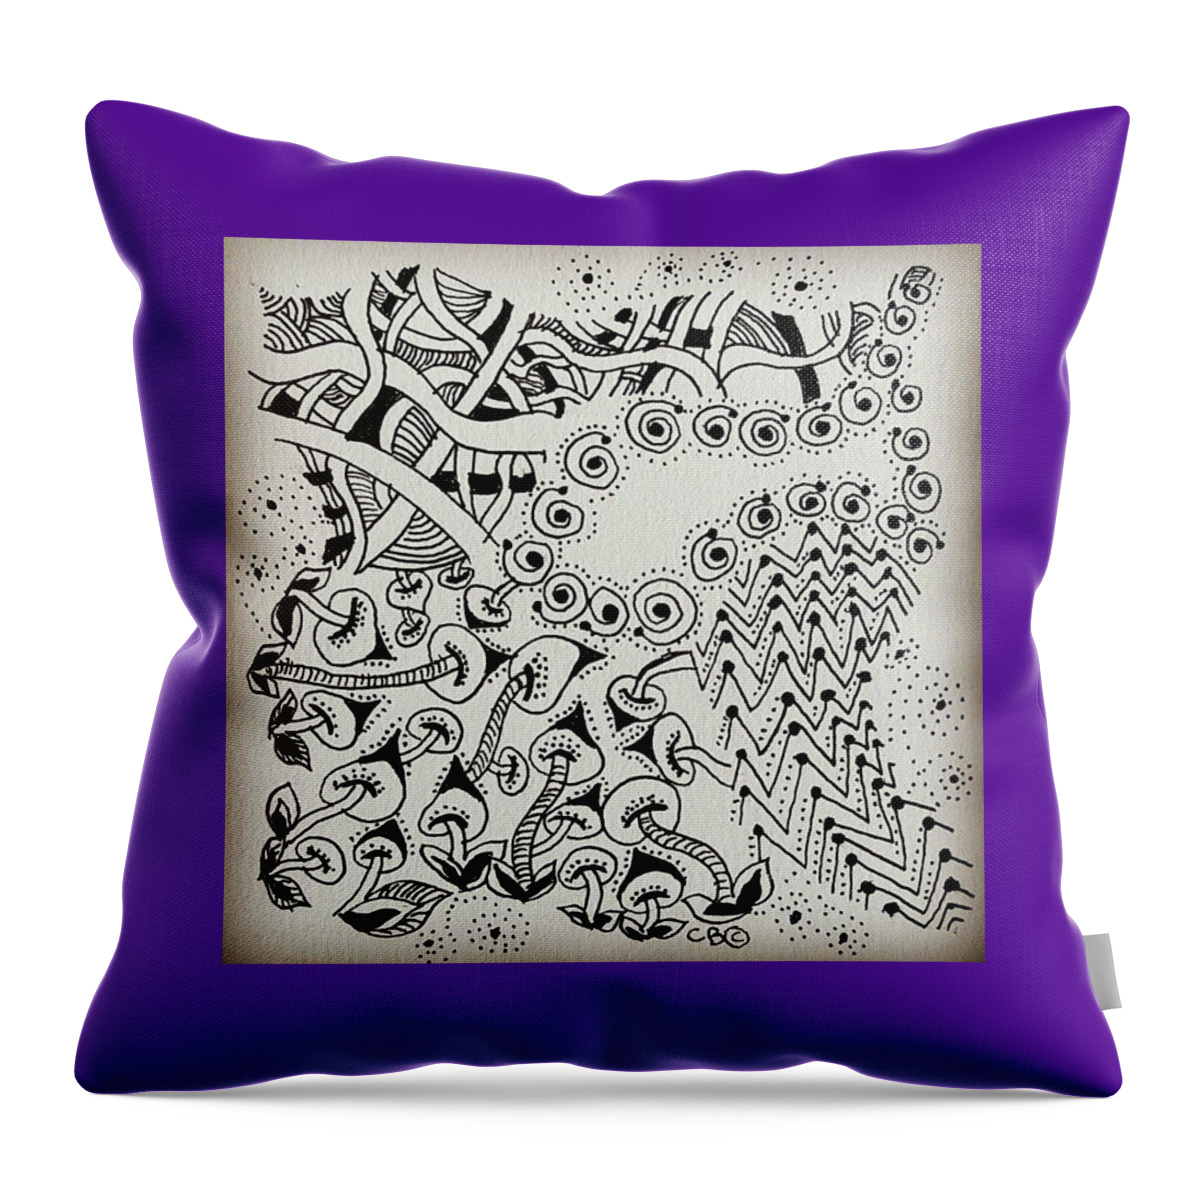 Zentangle Throw Pillow featuring the drawing Twinkle by Carole Brecht